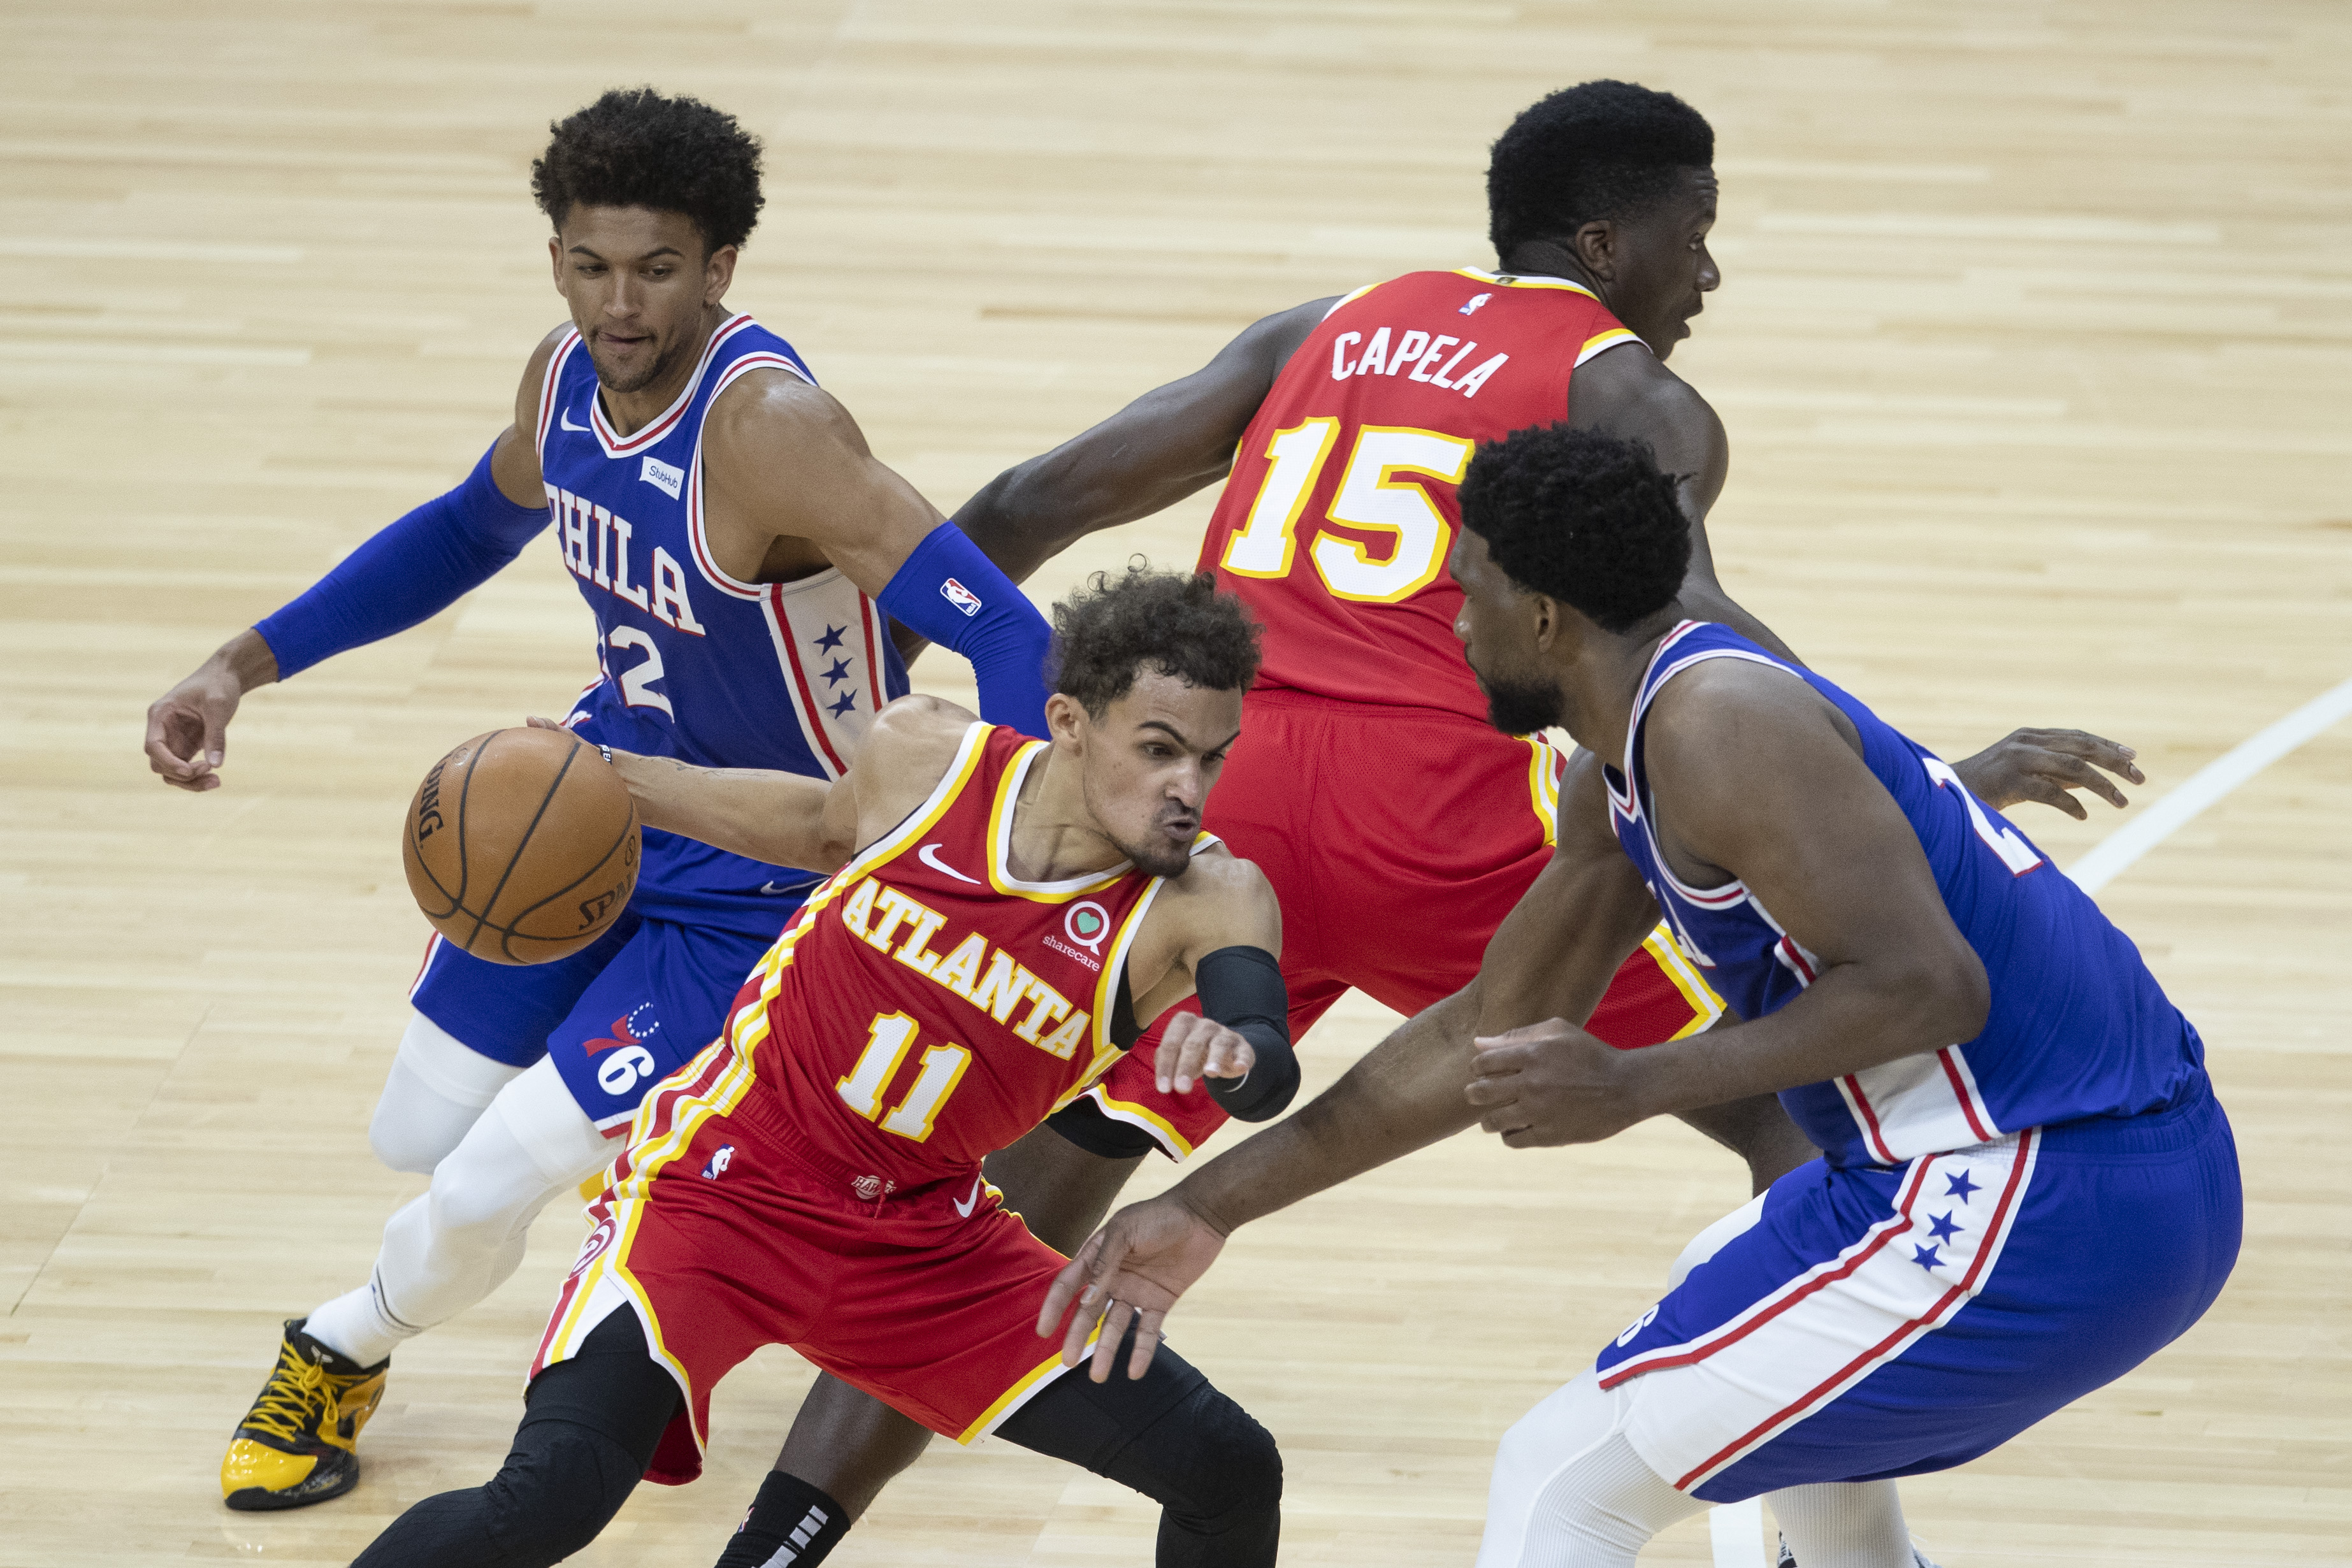 Philadelphia 76ers at Atlanta Hawks Game 3 free live stream (6/11/21) How to watch NBA, time, channel